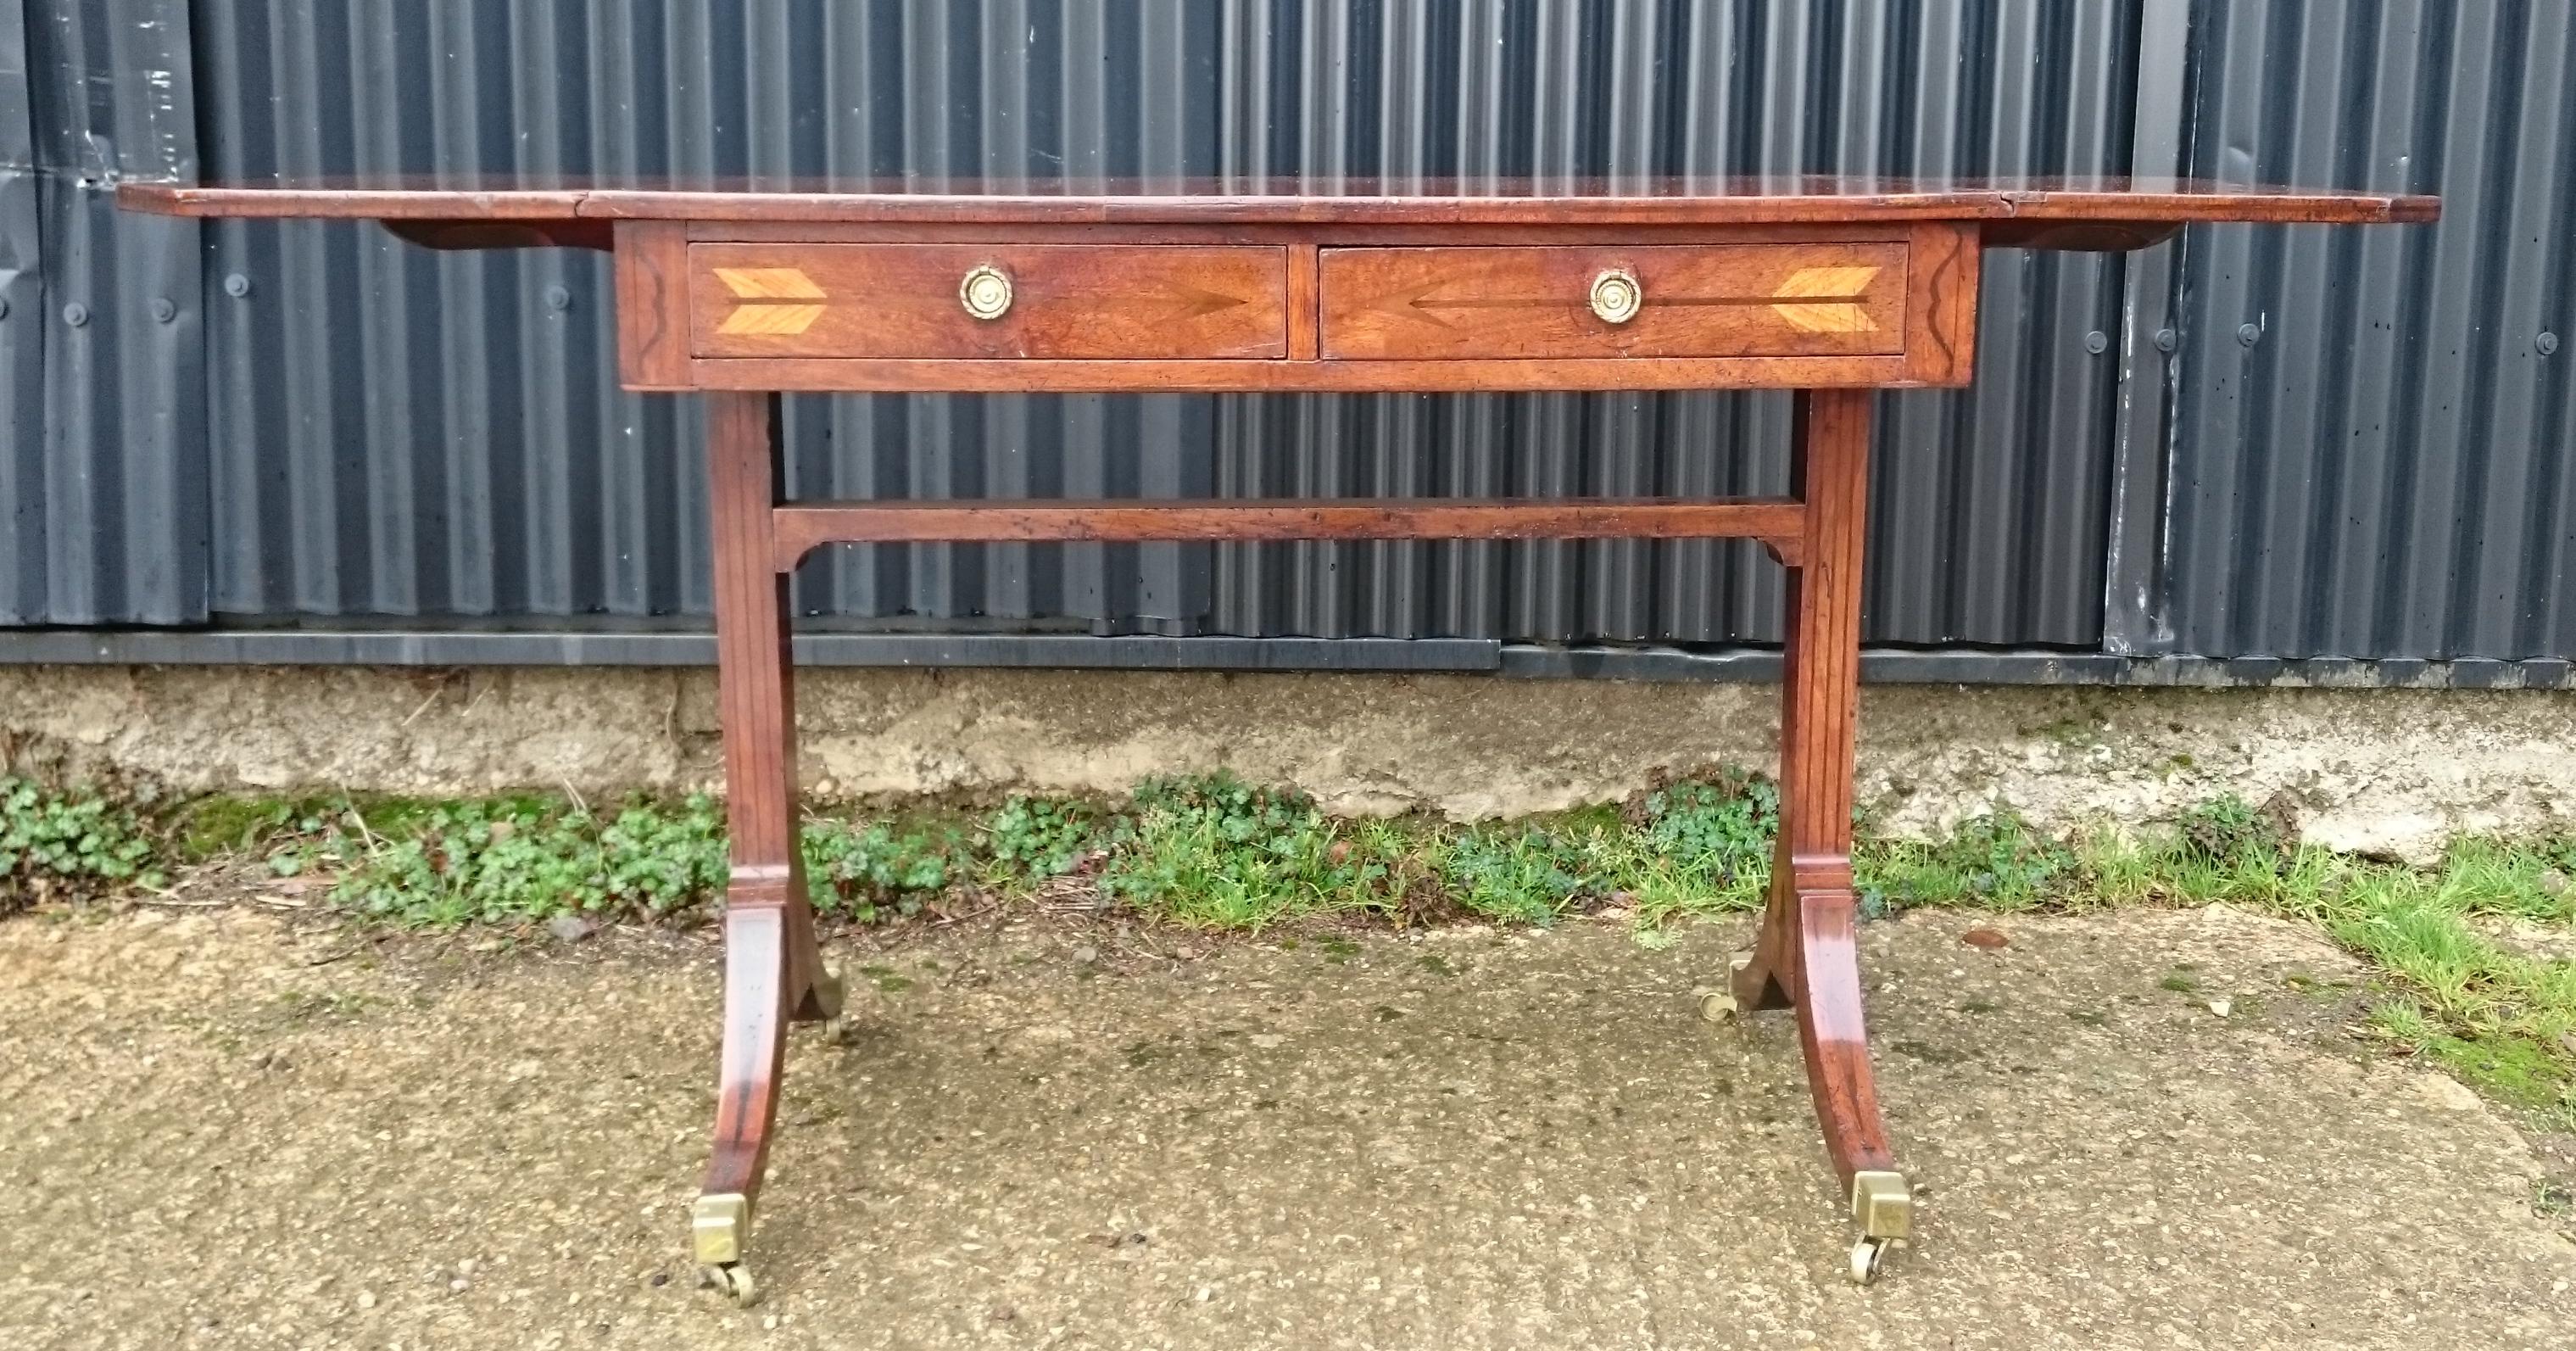 Early 19th century George III period mahogany antique sofa table. This sofa table is a real delight, it has all the sought after details such as the four splay end support, high stretcher and it is free standing. As well as this the timber has a